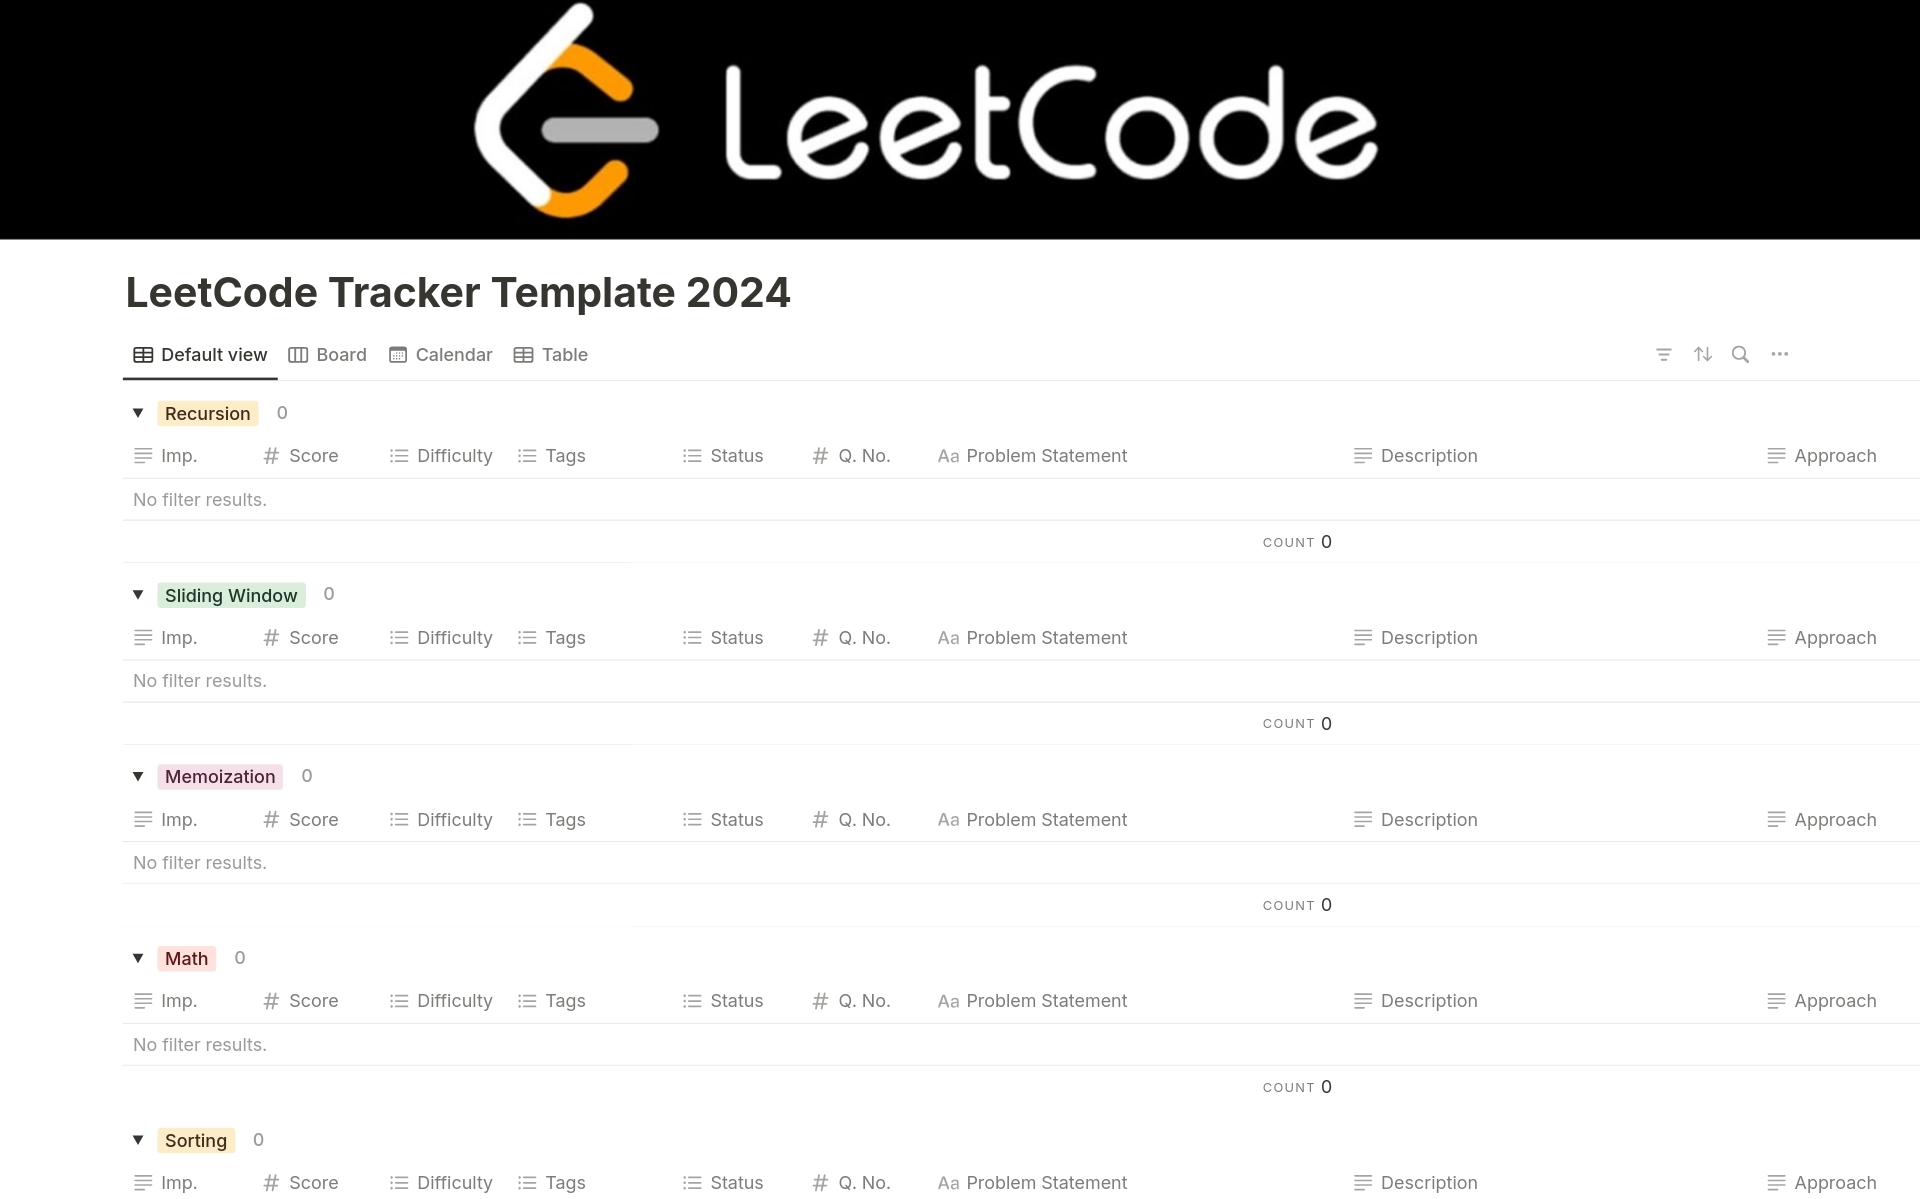 A template preview for Leetcode Tracker 2024